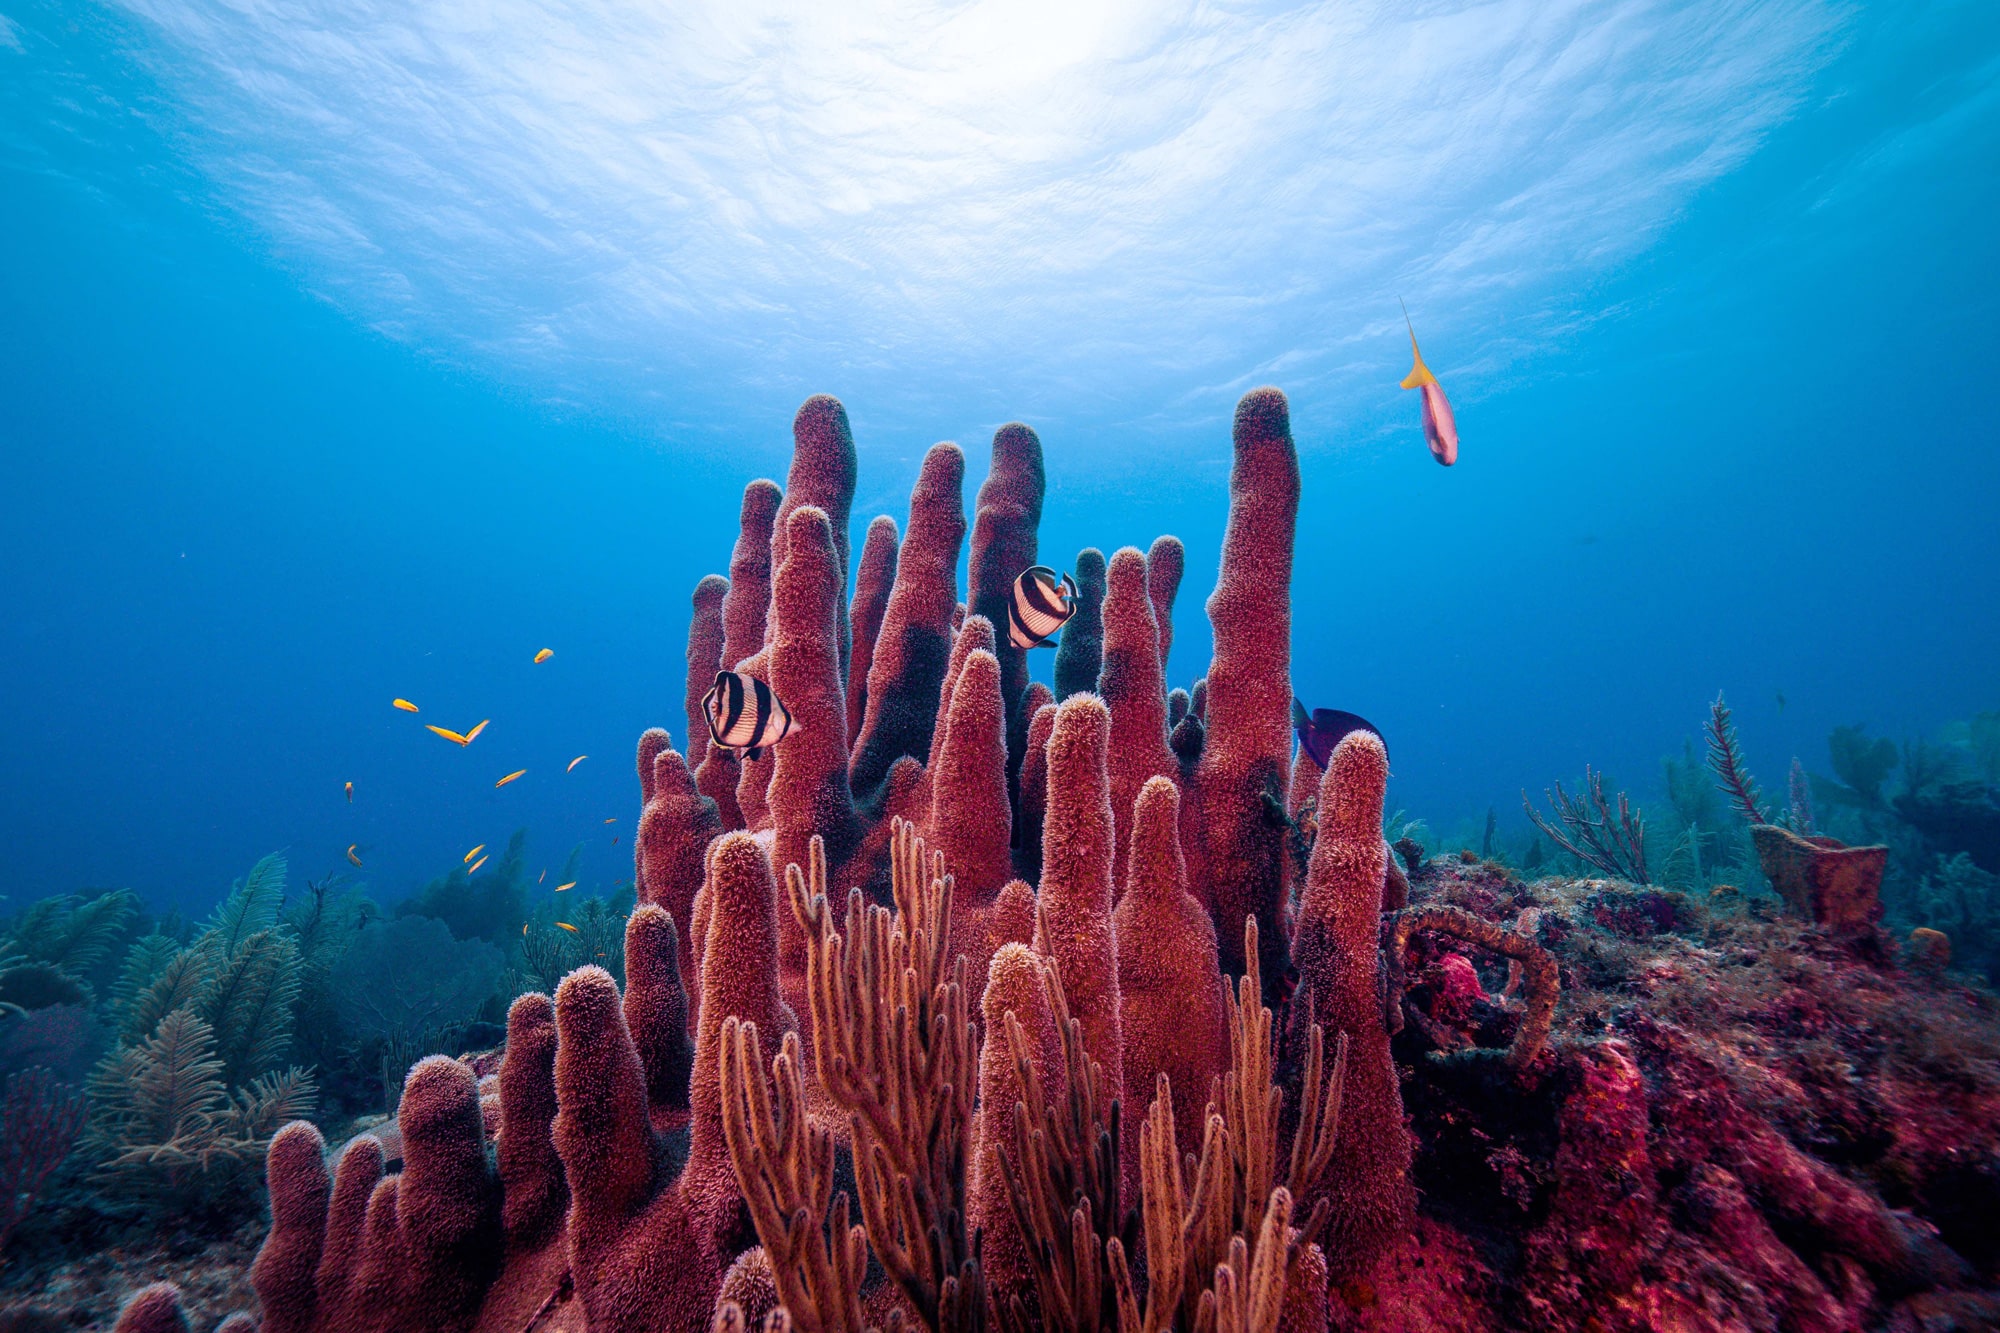  How Do Coral Reefs Help Humans